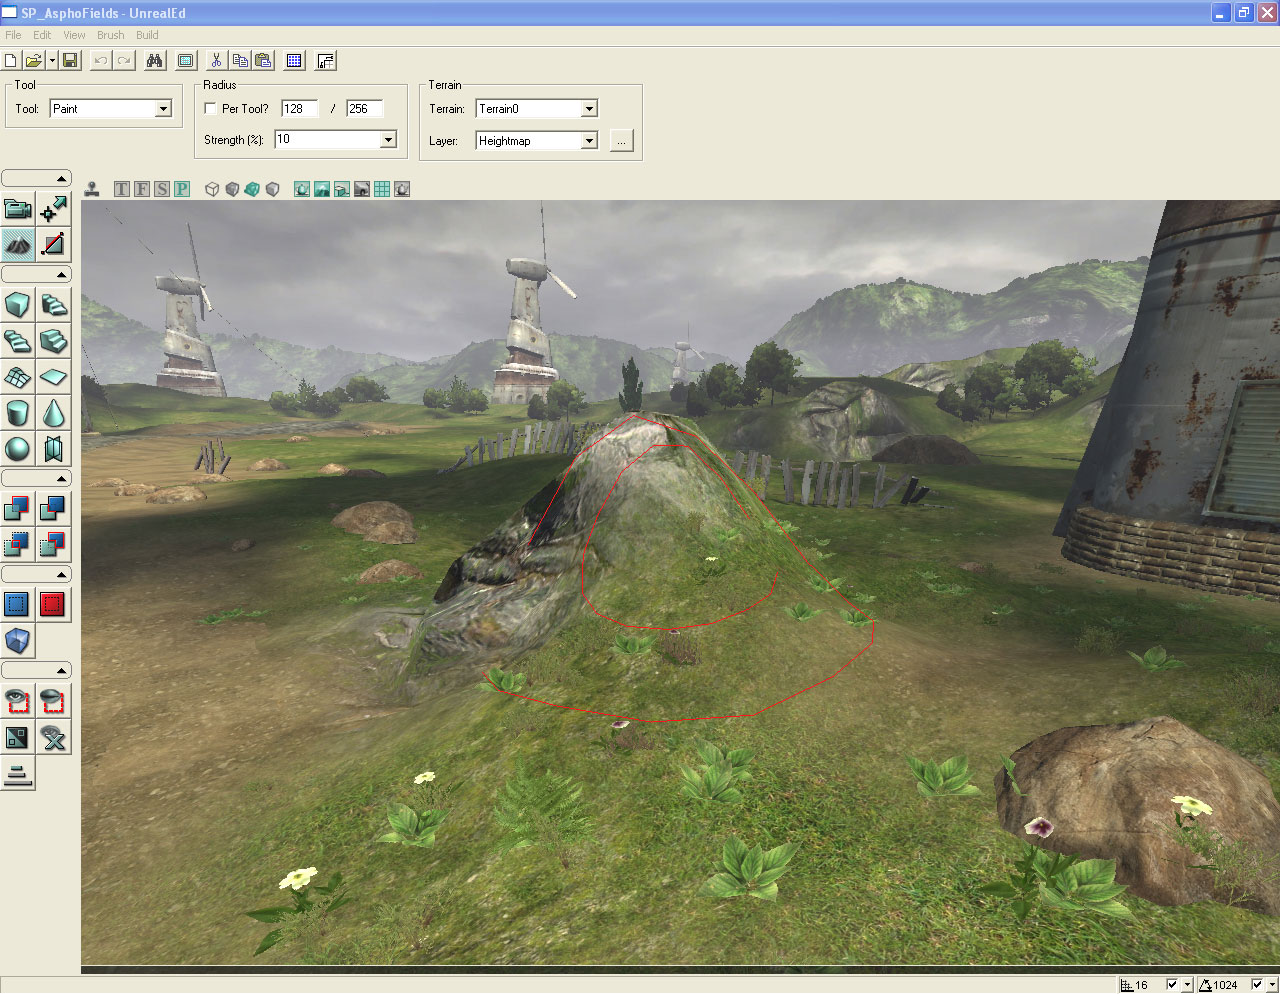 unreal engine 5 free download